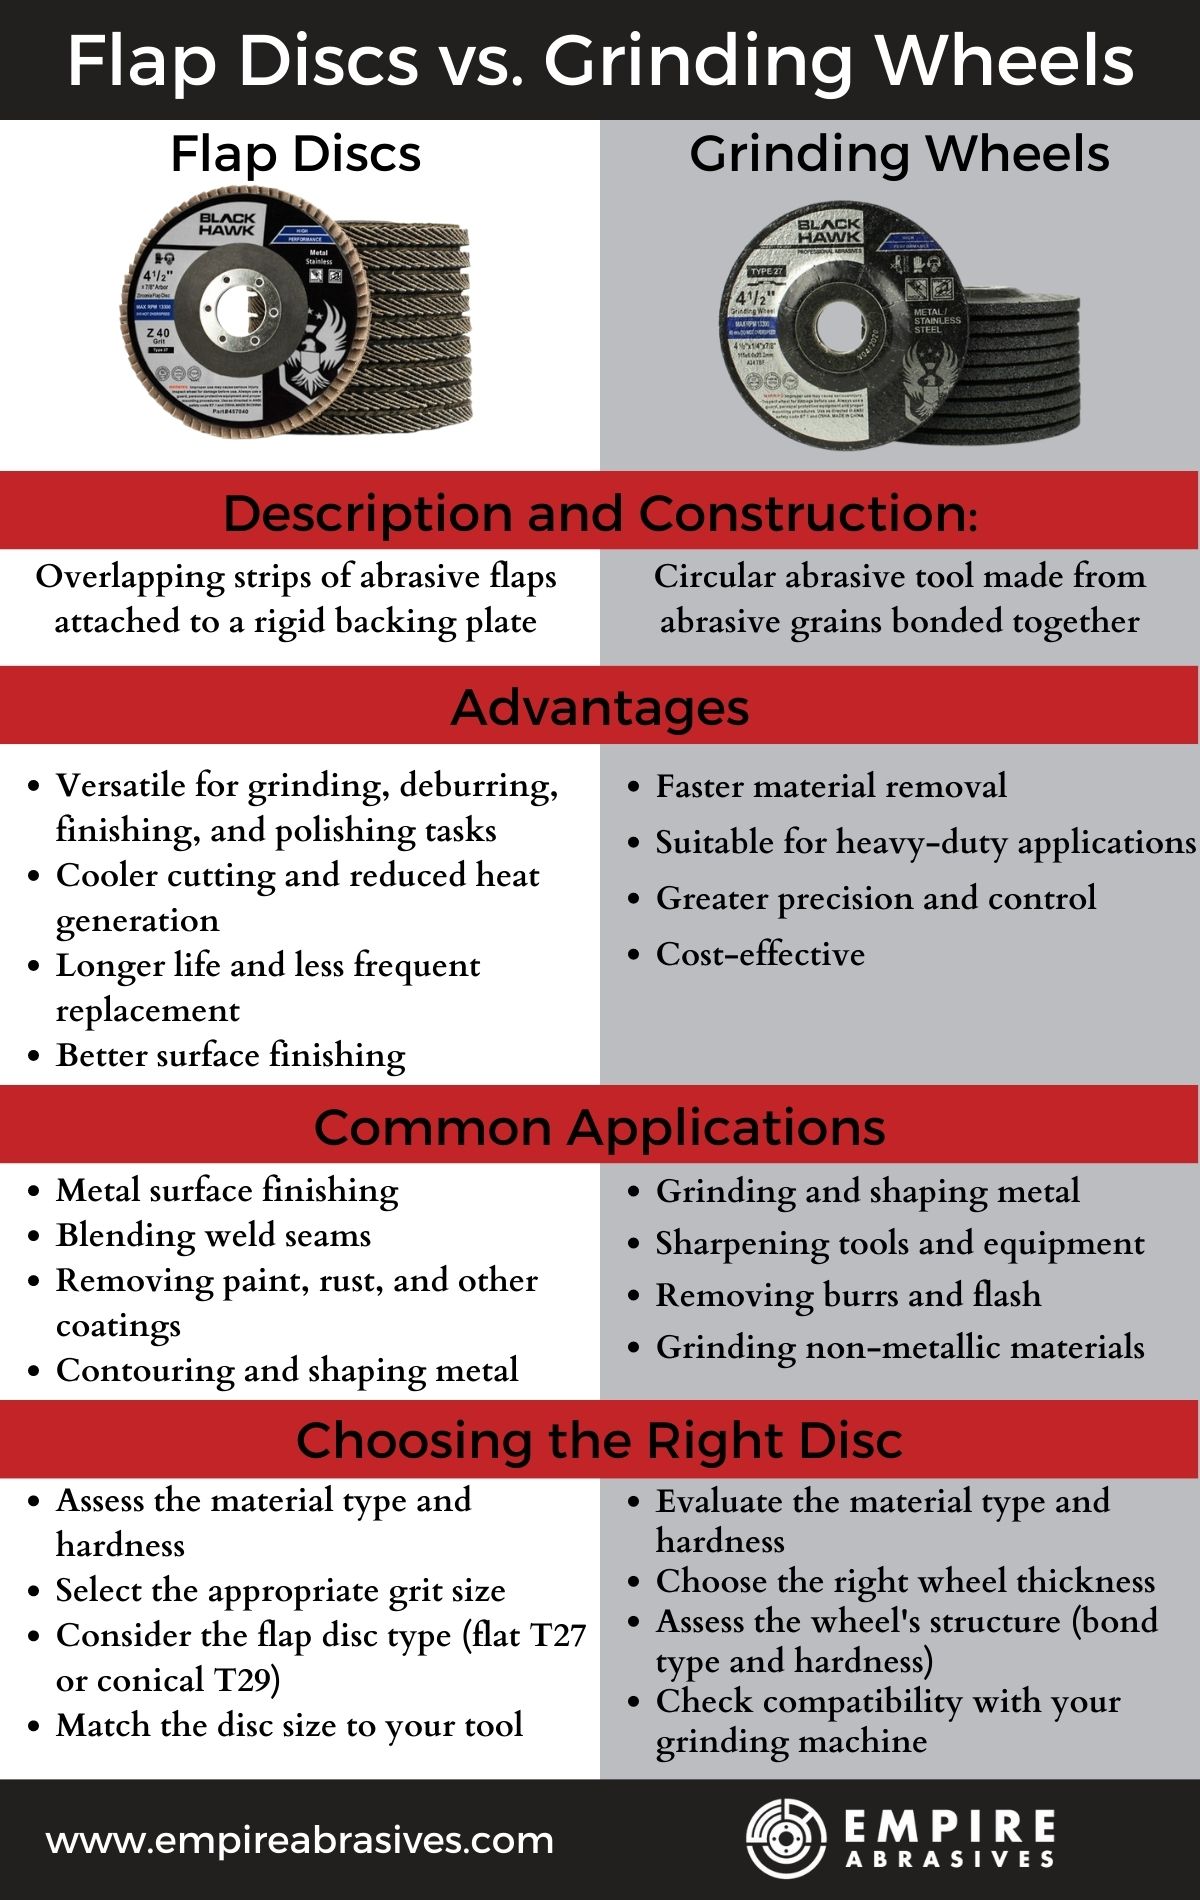 Flap discs vs grinding wheels infographic - uses, benefits, construction, tips for shopping